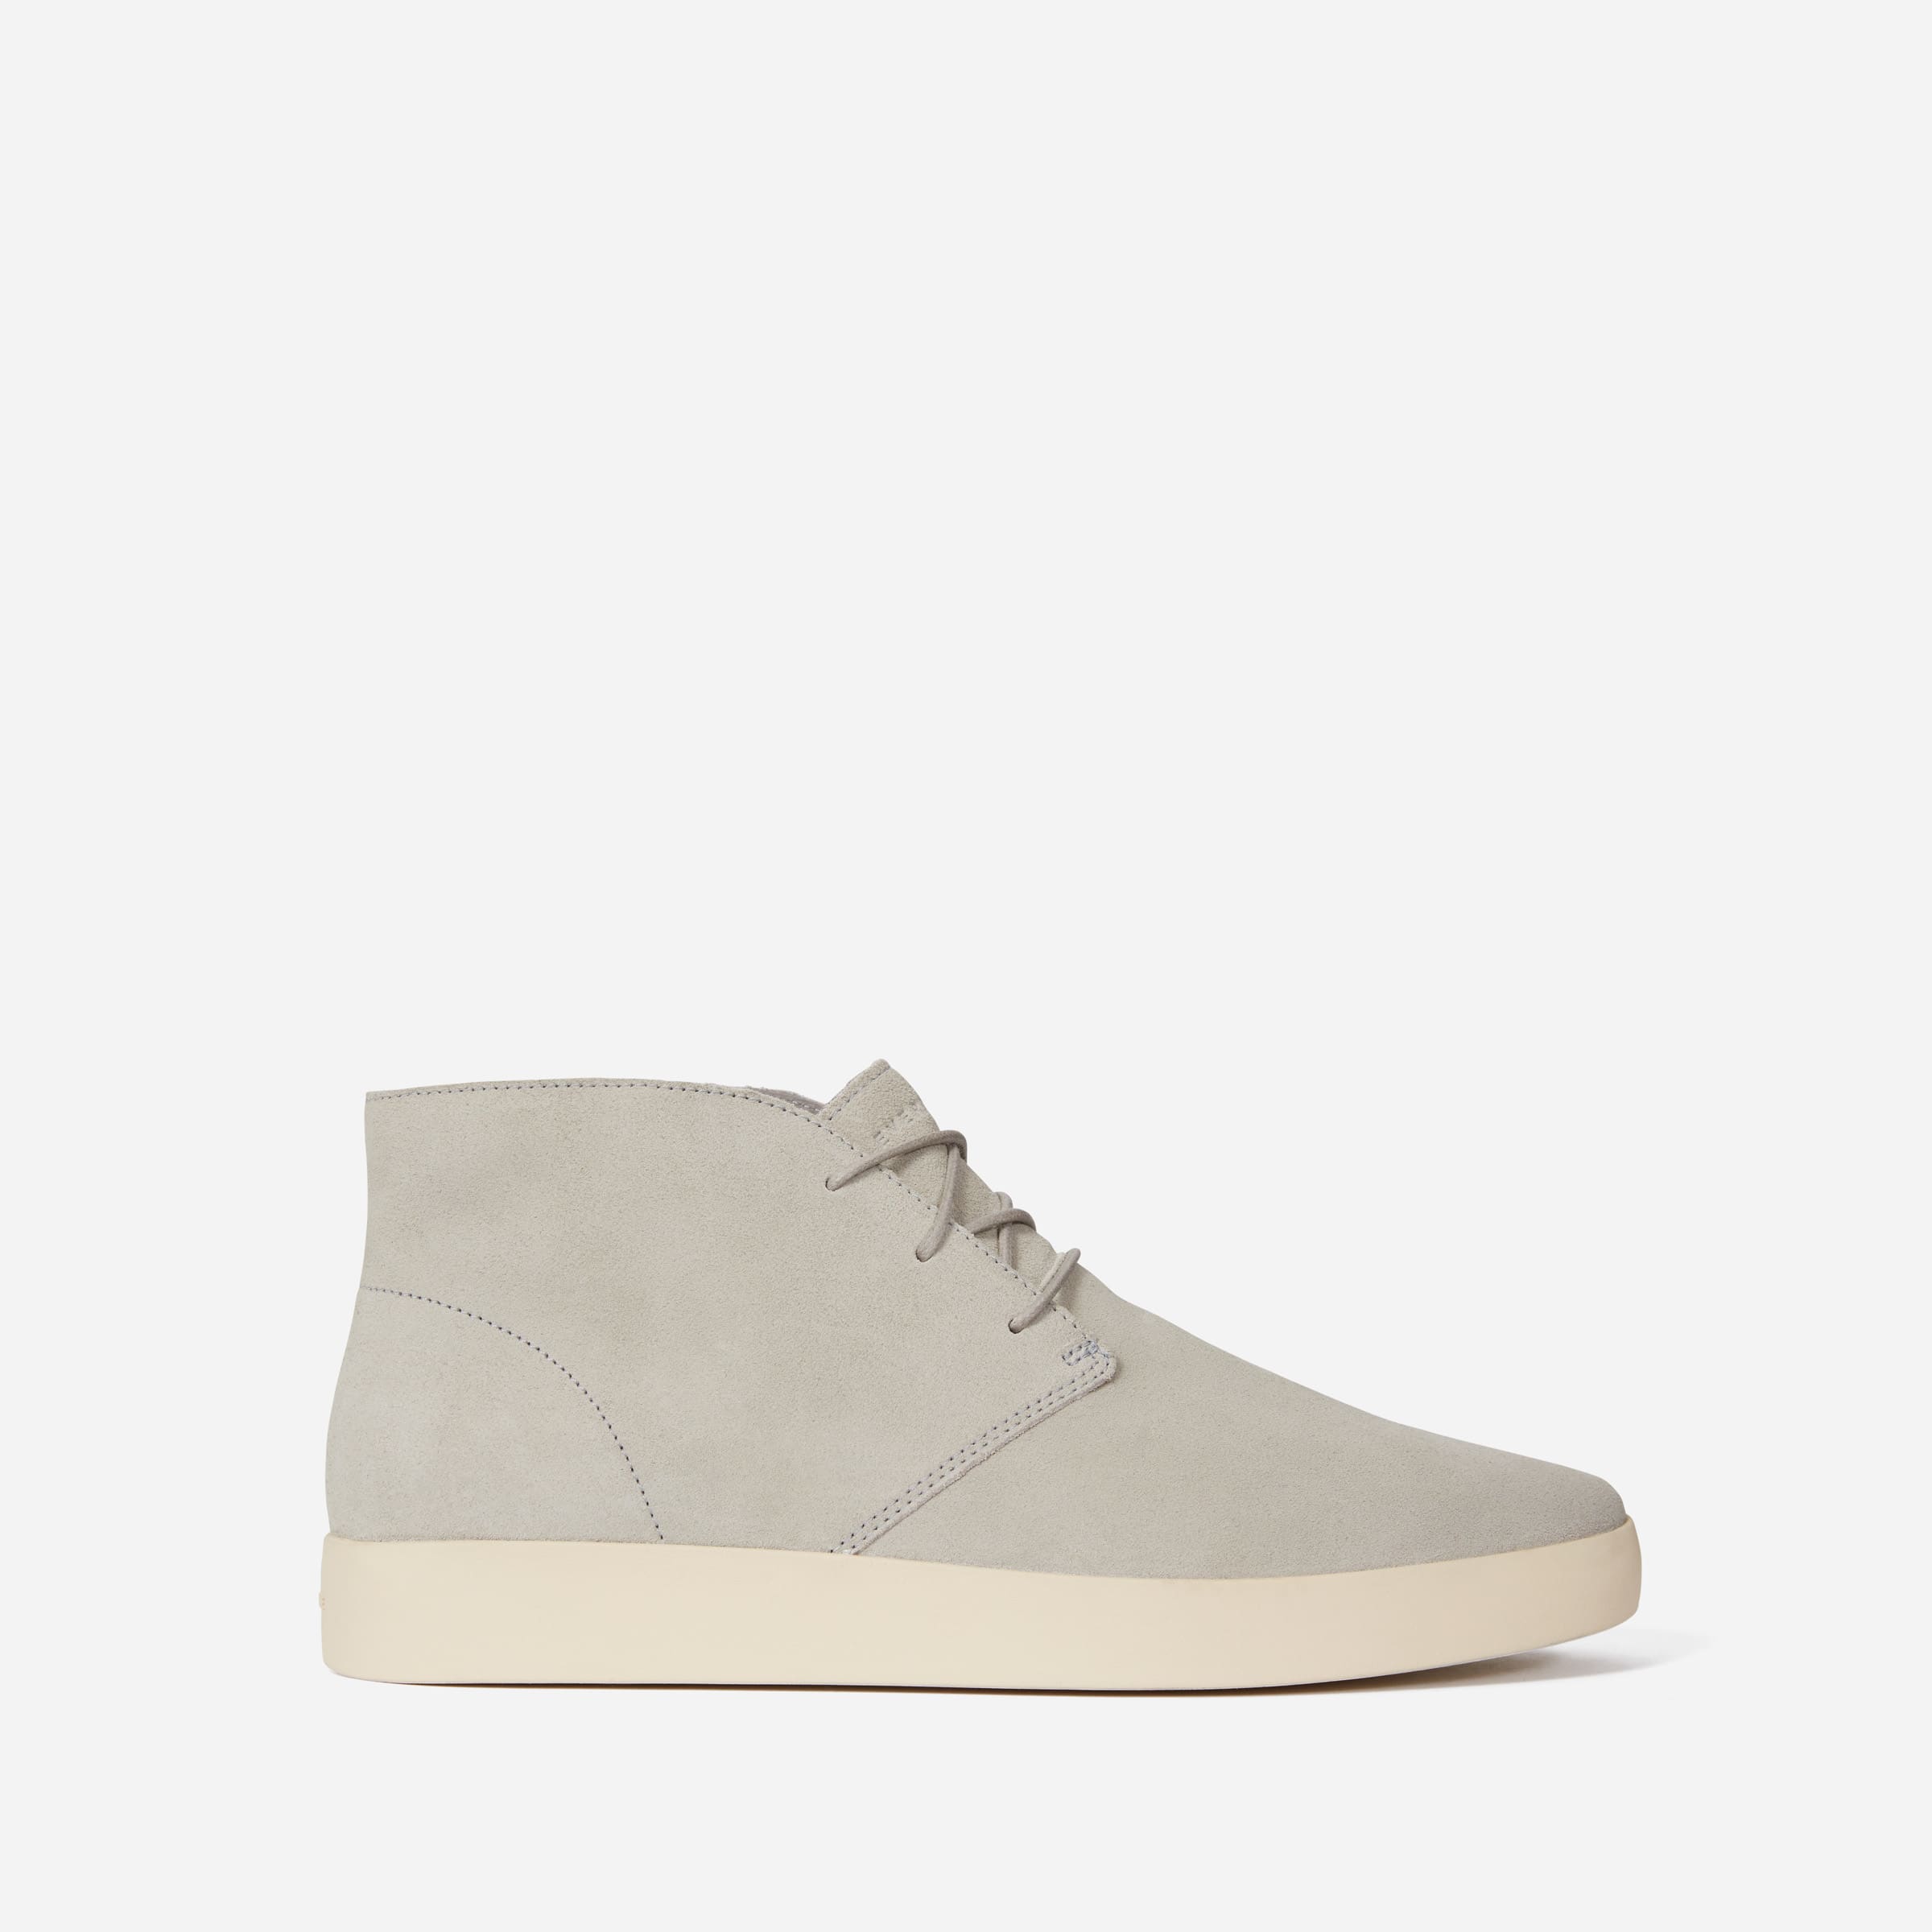 The Desert Boot Cool Grey Suede – Everlane